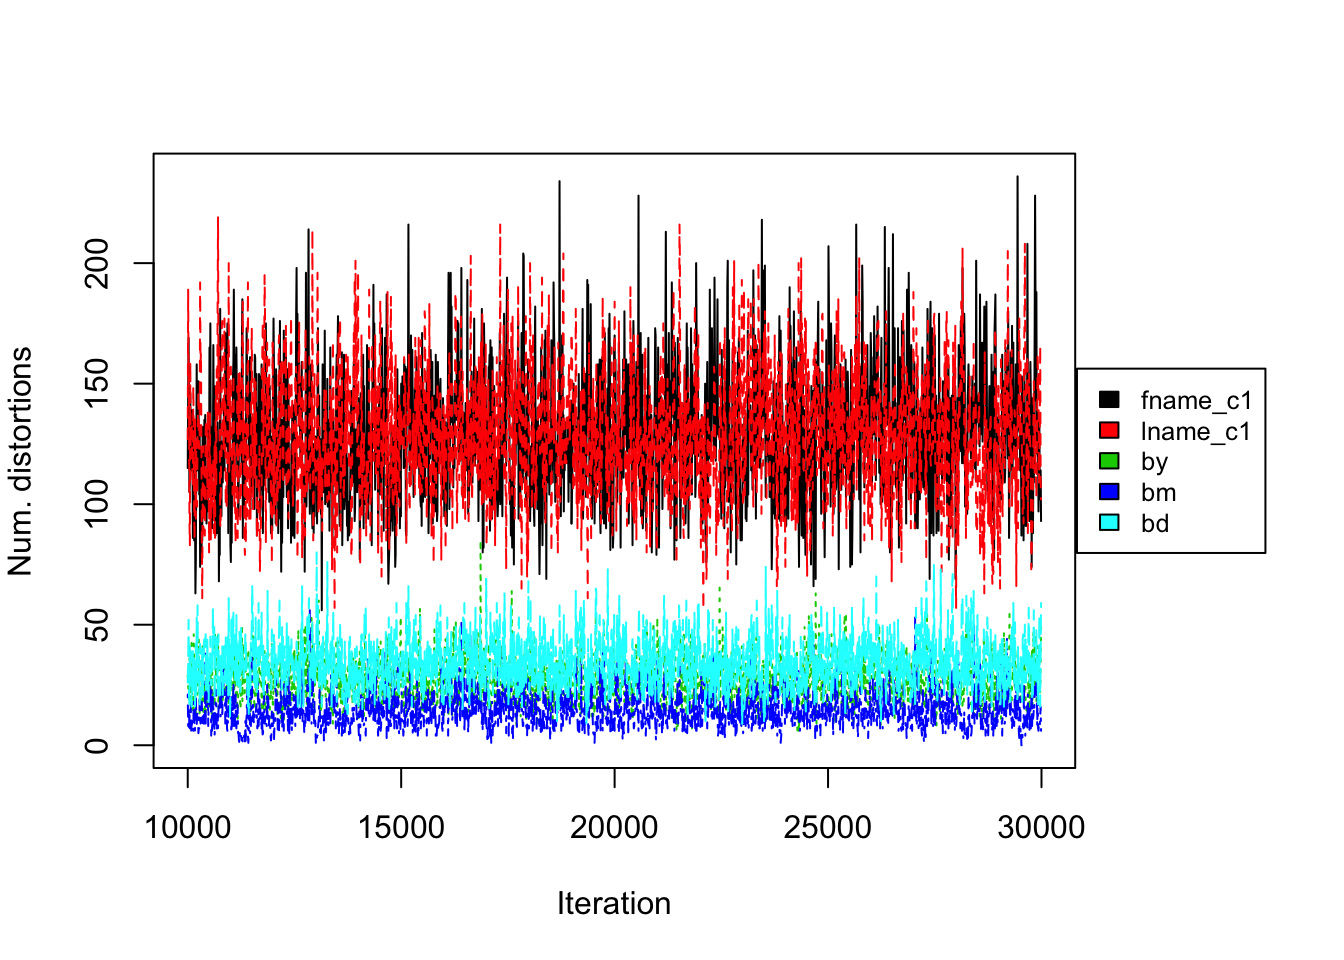 PYP prior on RLdata500. Convergence diagnostic plot for the number of distortions in each attribute along the Markov Chain.